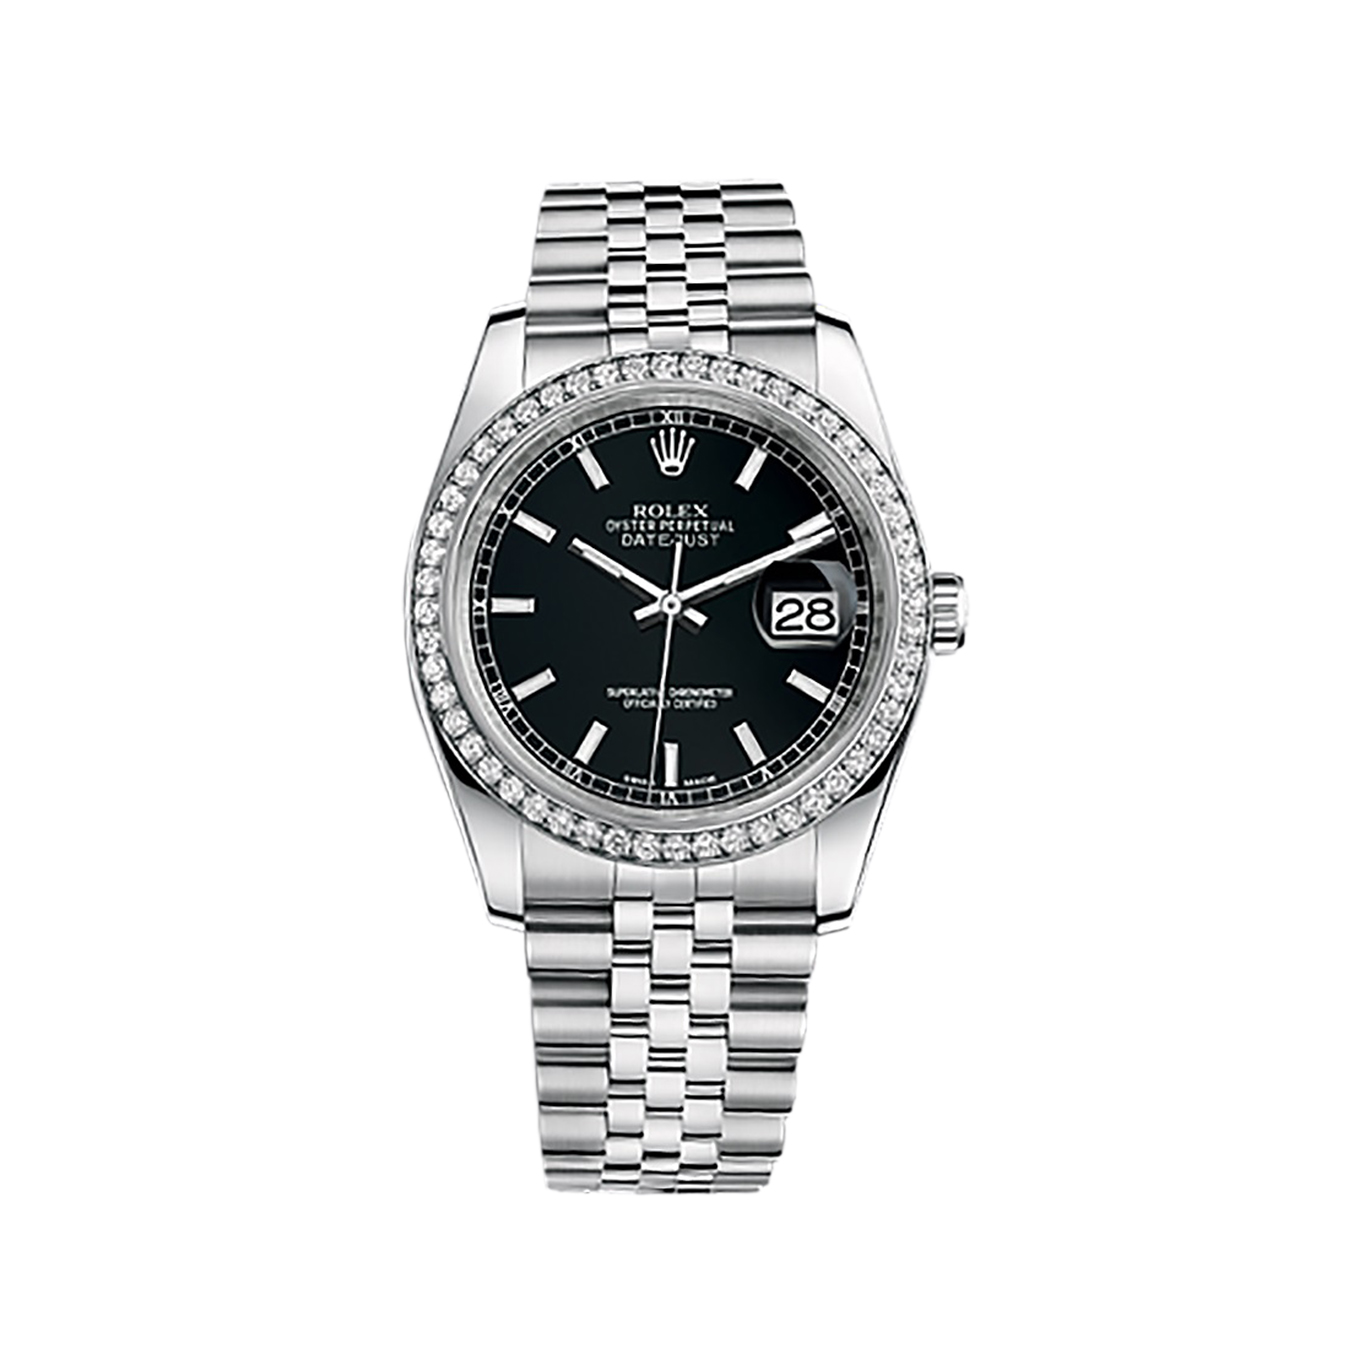 Datejust 36 116244 White Gold & Stainless Steel Watch (Black)